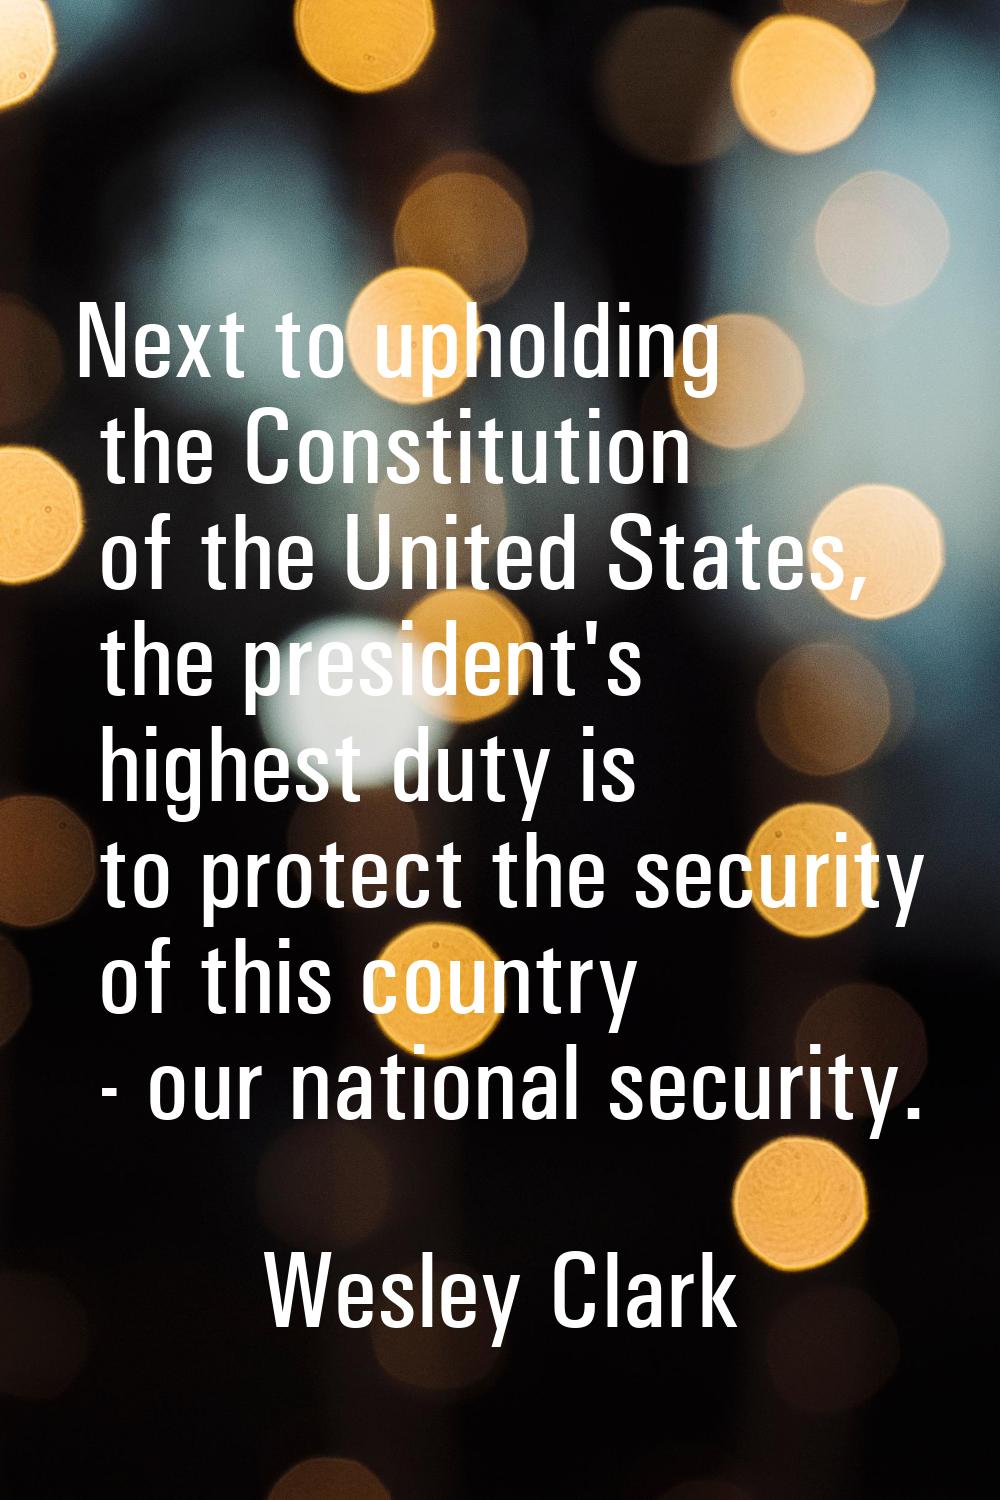 Next to upholding the Constitution of the United States, the president's highest duty is to protect